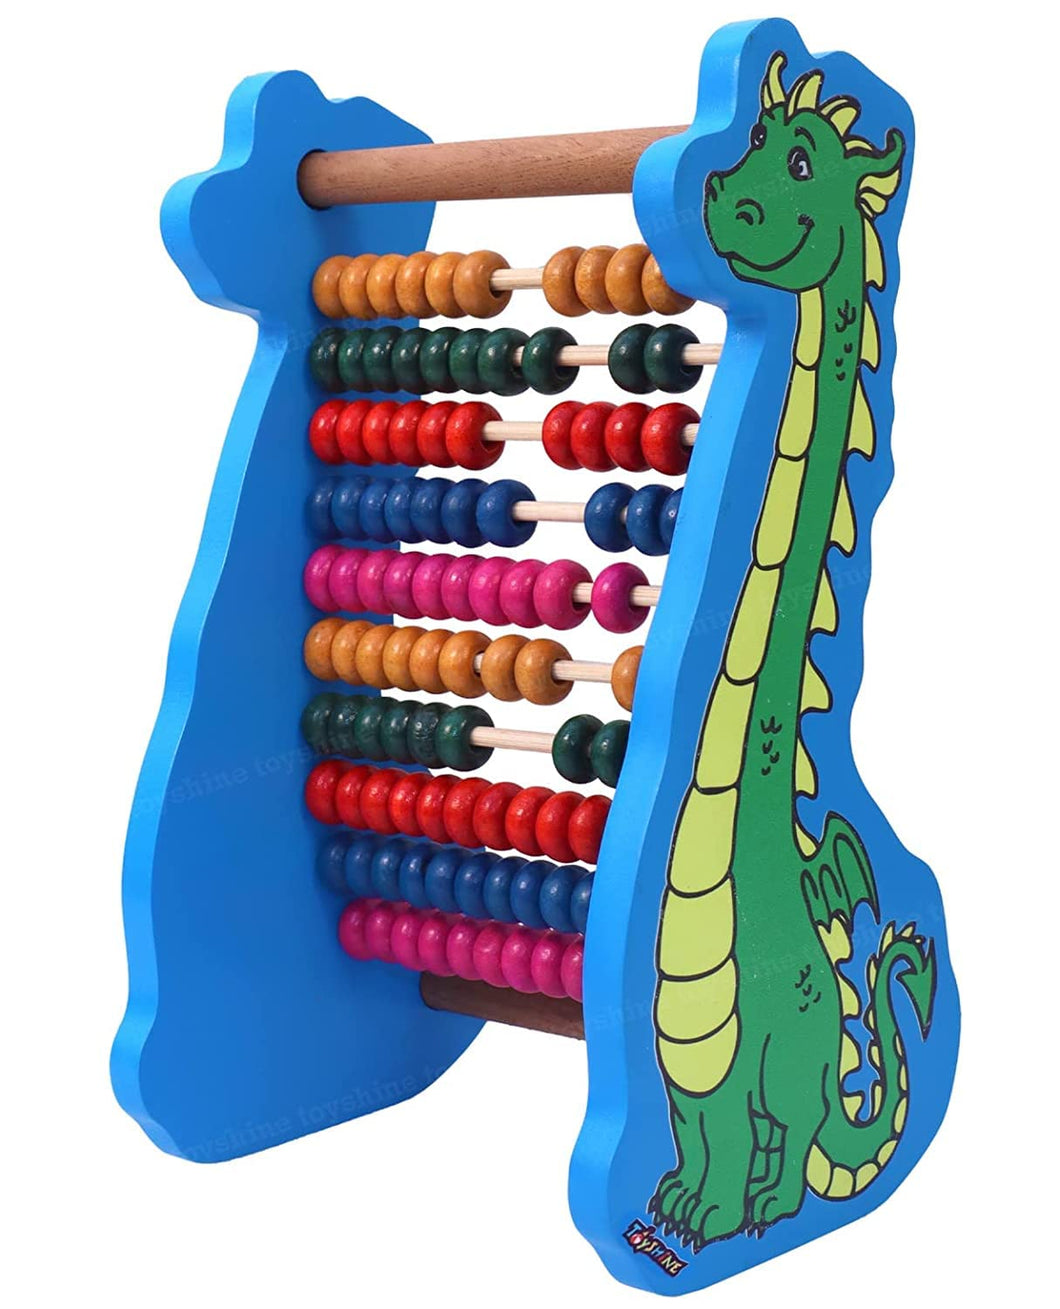 Toyshine Dinosaur Wooden Abacus and Learning Play Center - Multicolor